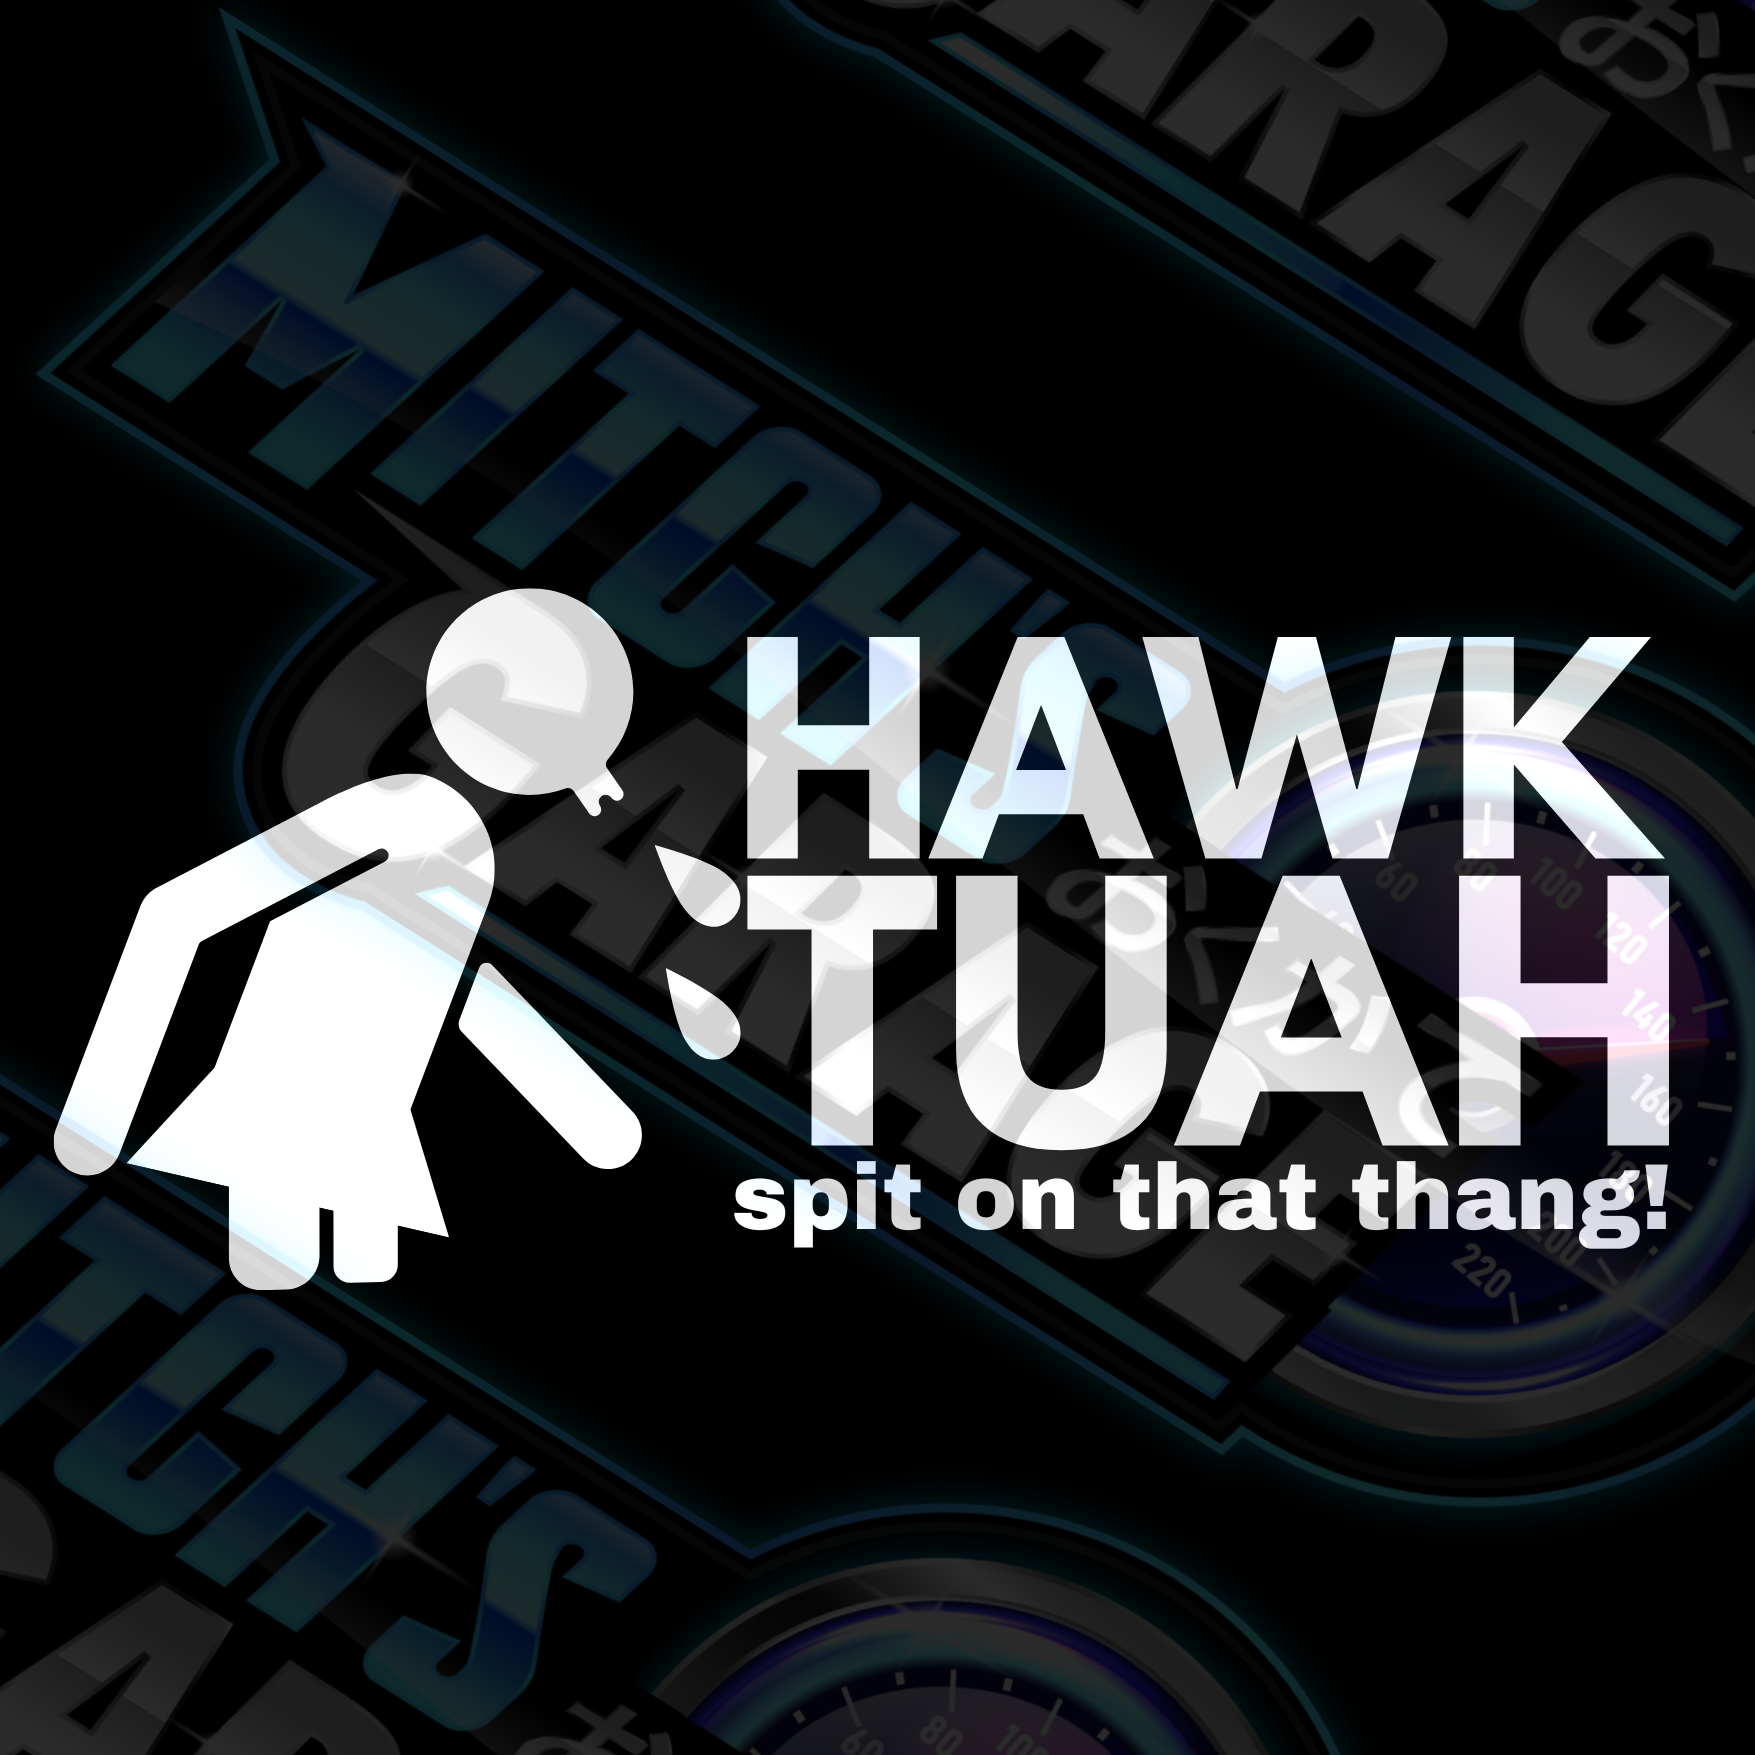 Hawk Tuah "spit on that thang!" Vinyl Decal